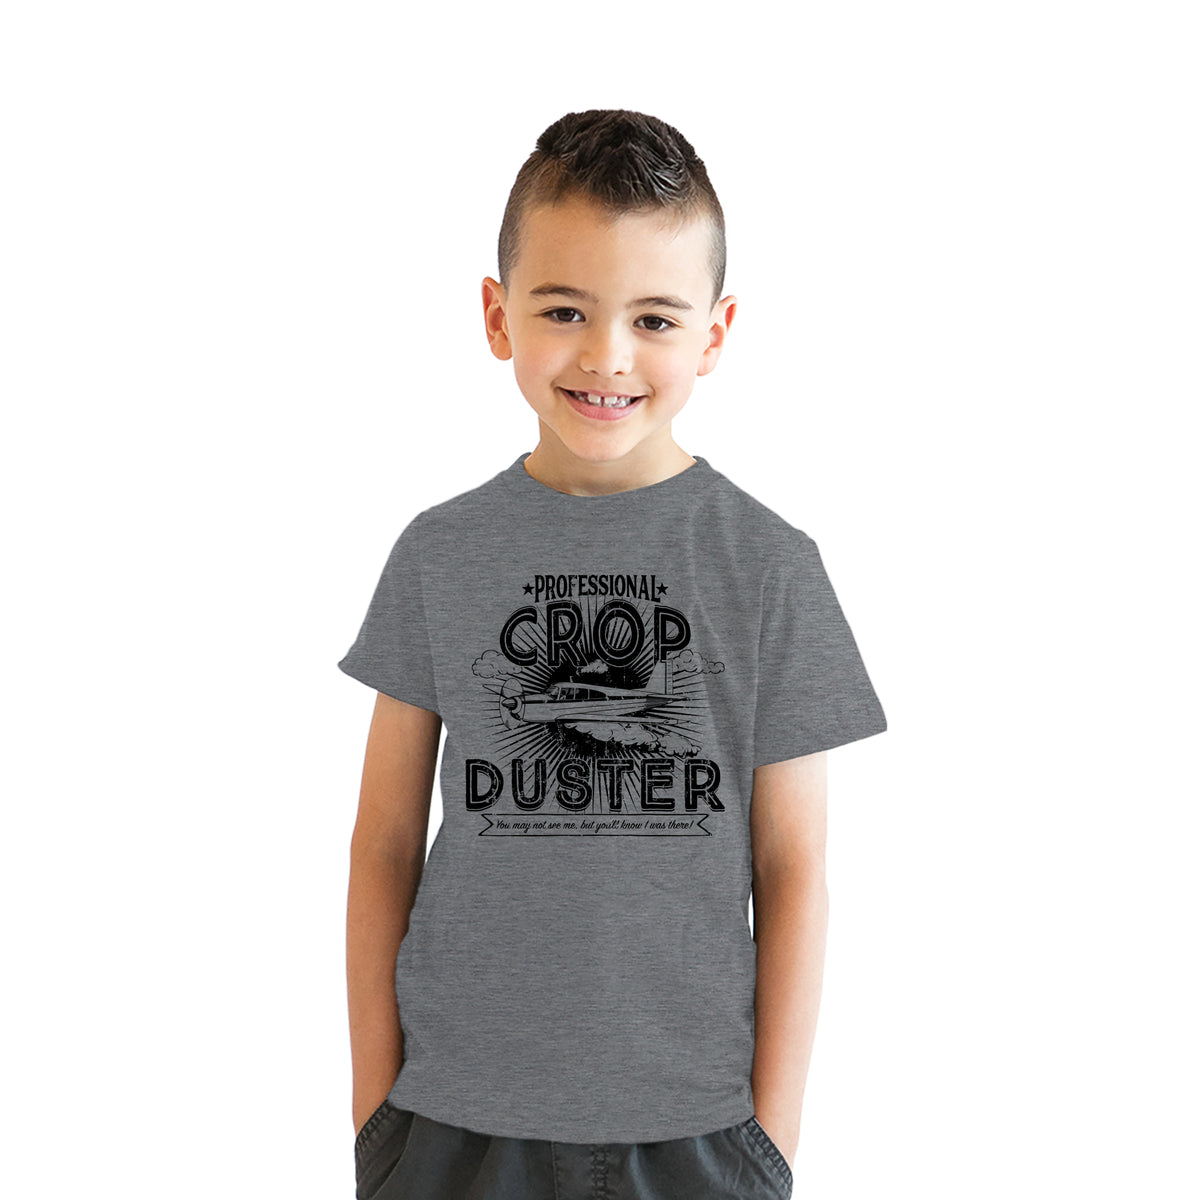 Professional Crop Duster Youth T Shirt